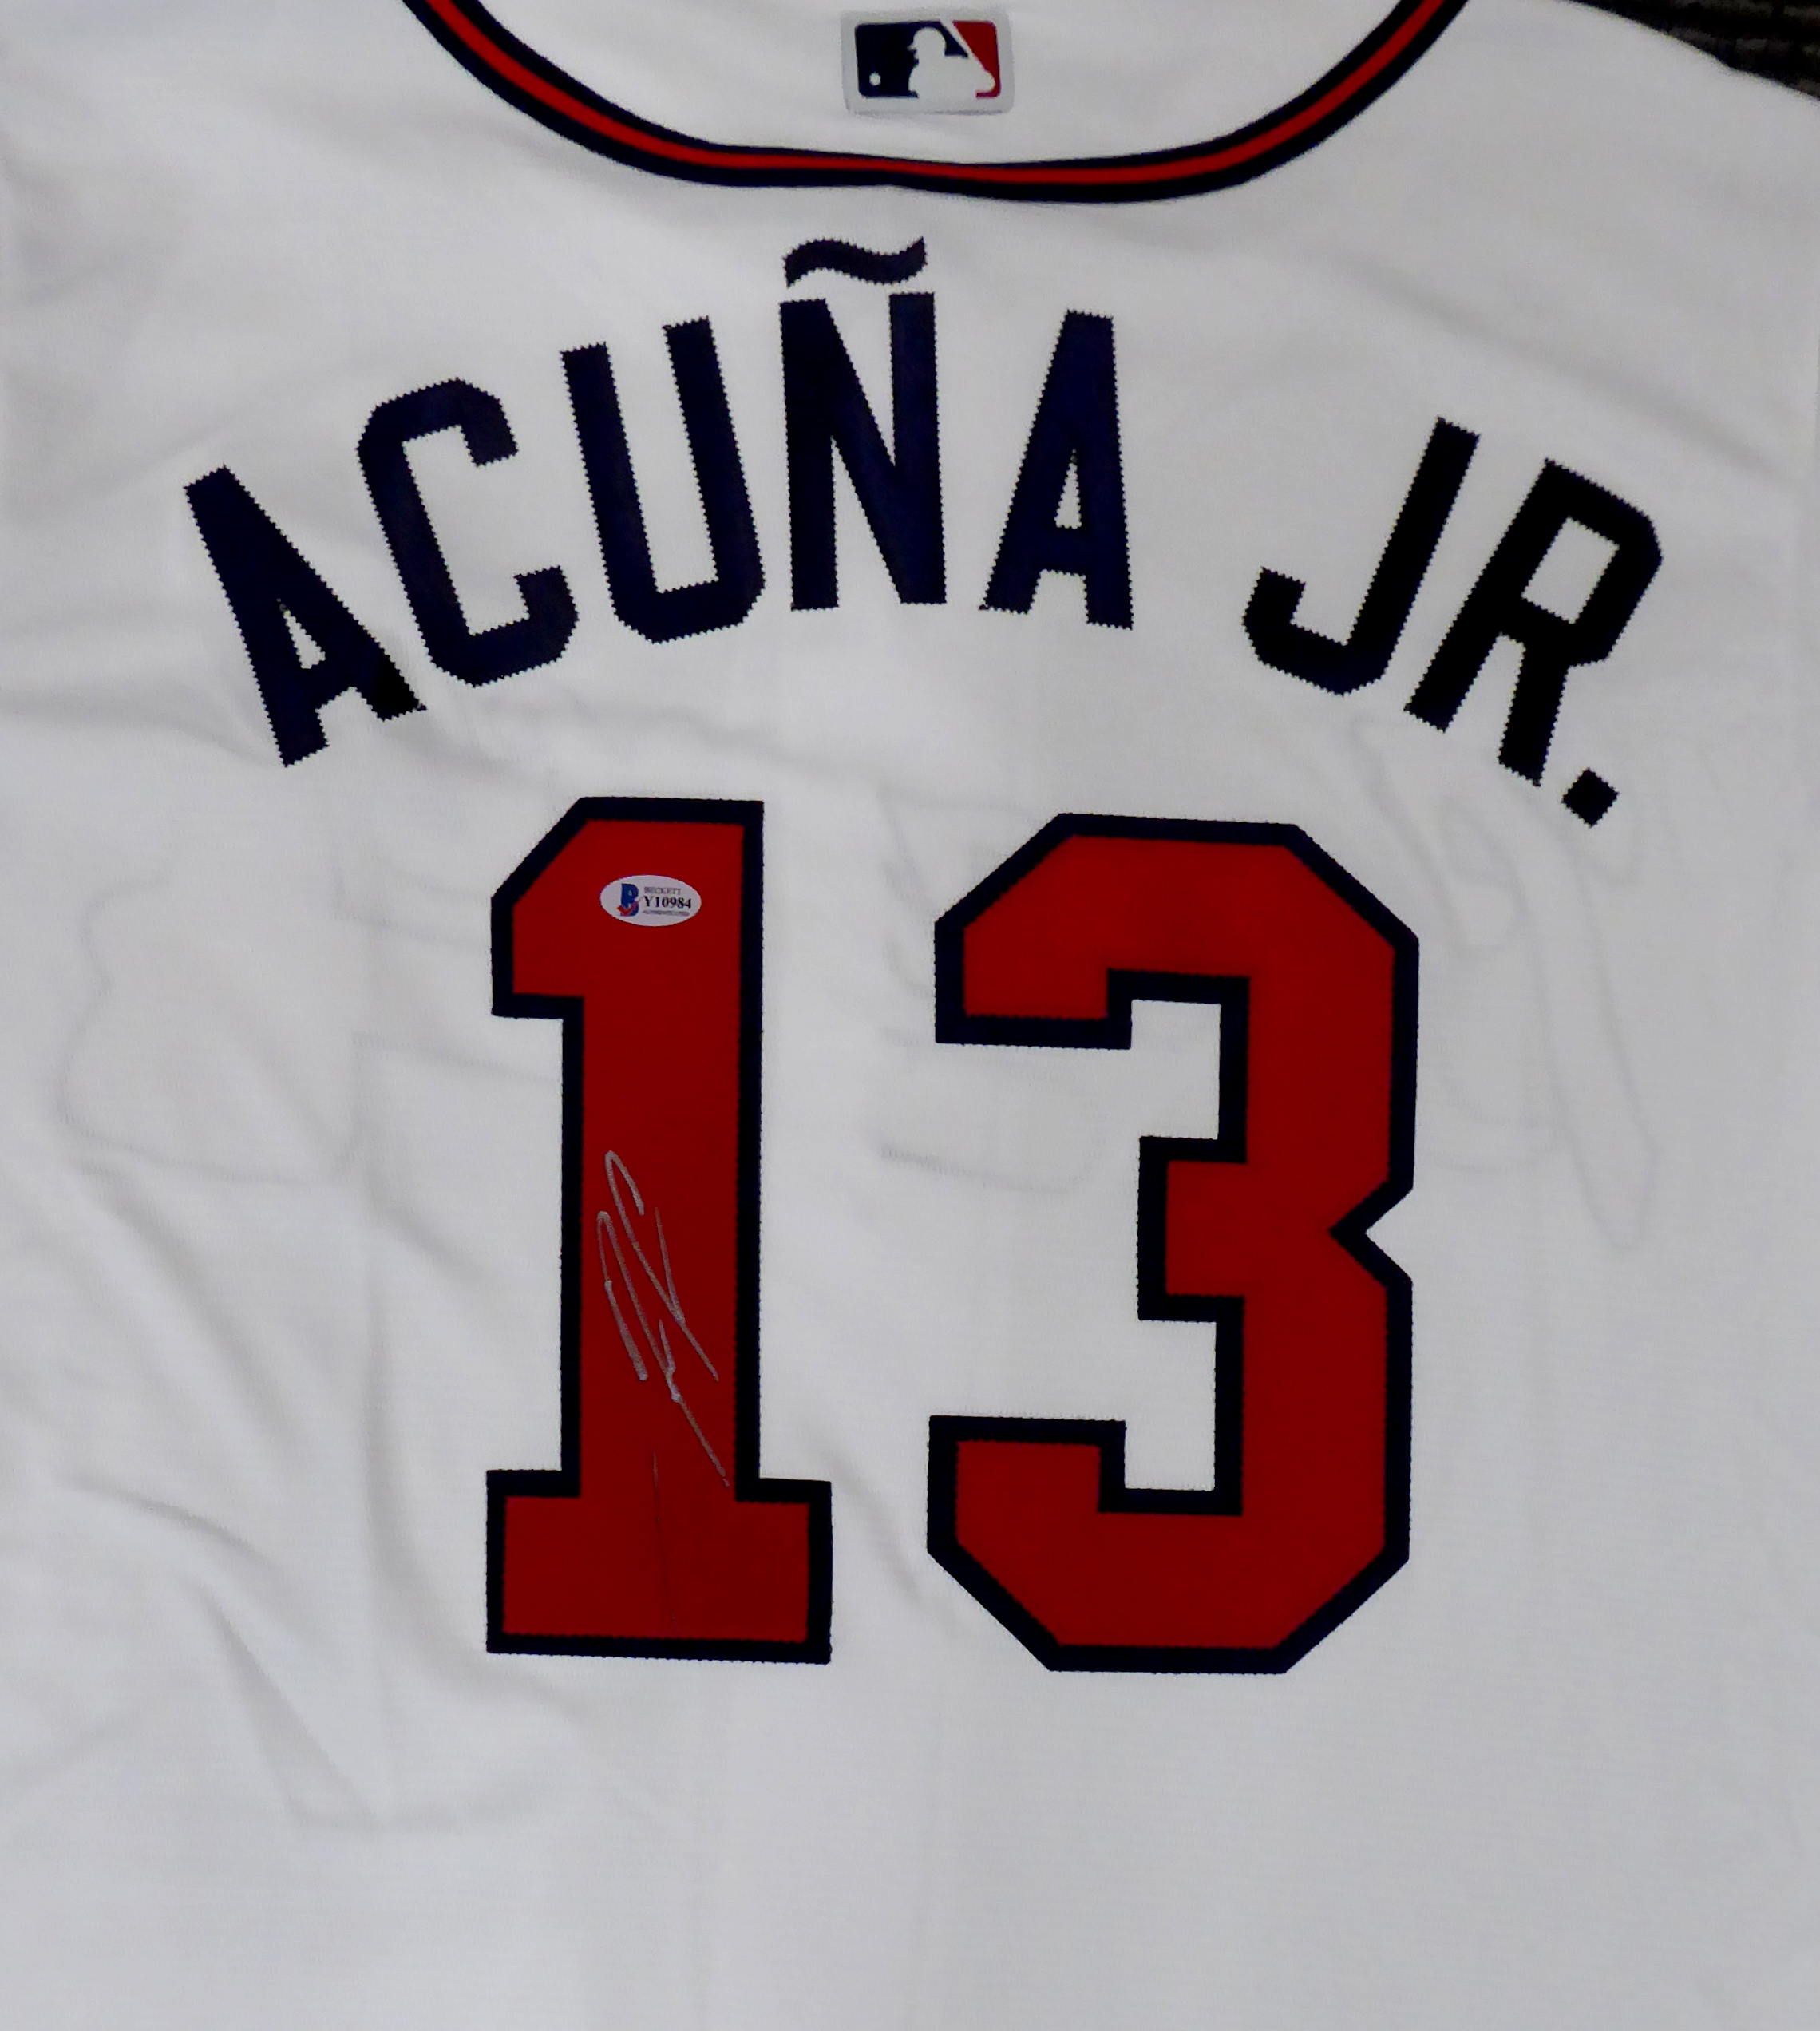 Ronald Acuna Jr. Signed Atlanta Braves Jersey (Throwback) – More Than Sports